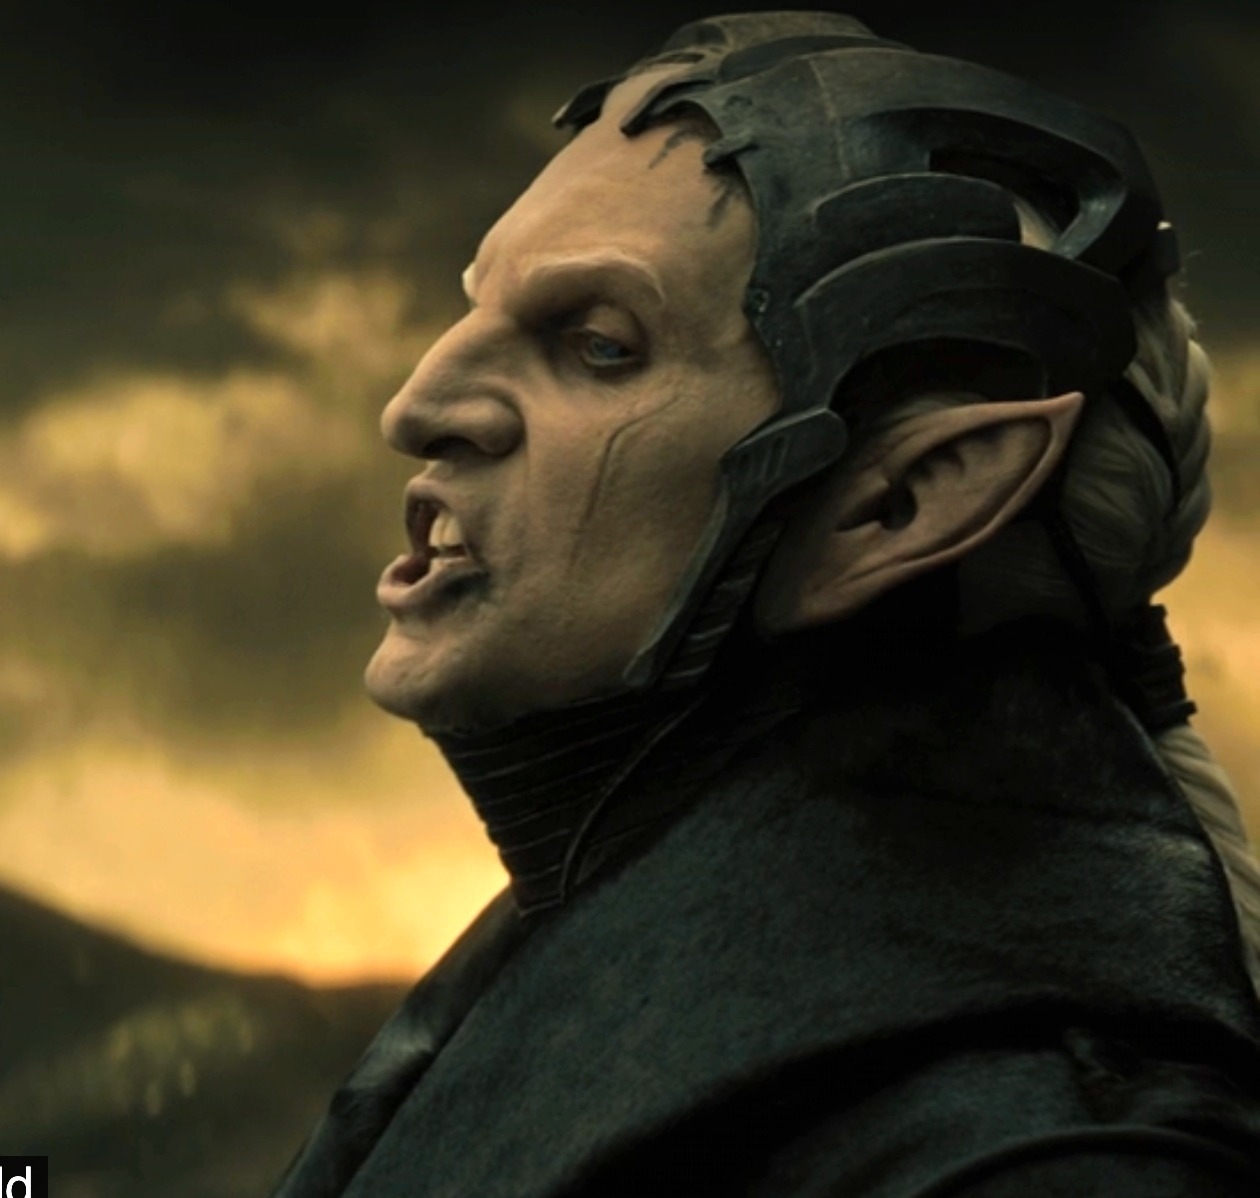 Chris as Malekith pointed ears and a helmet in a dramatic expression